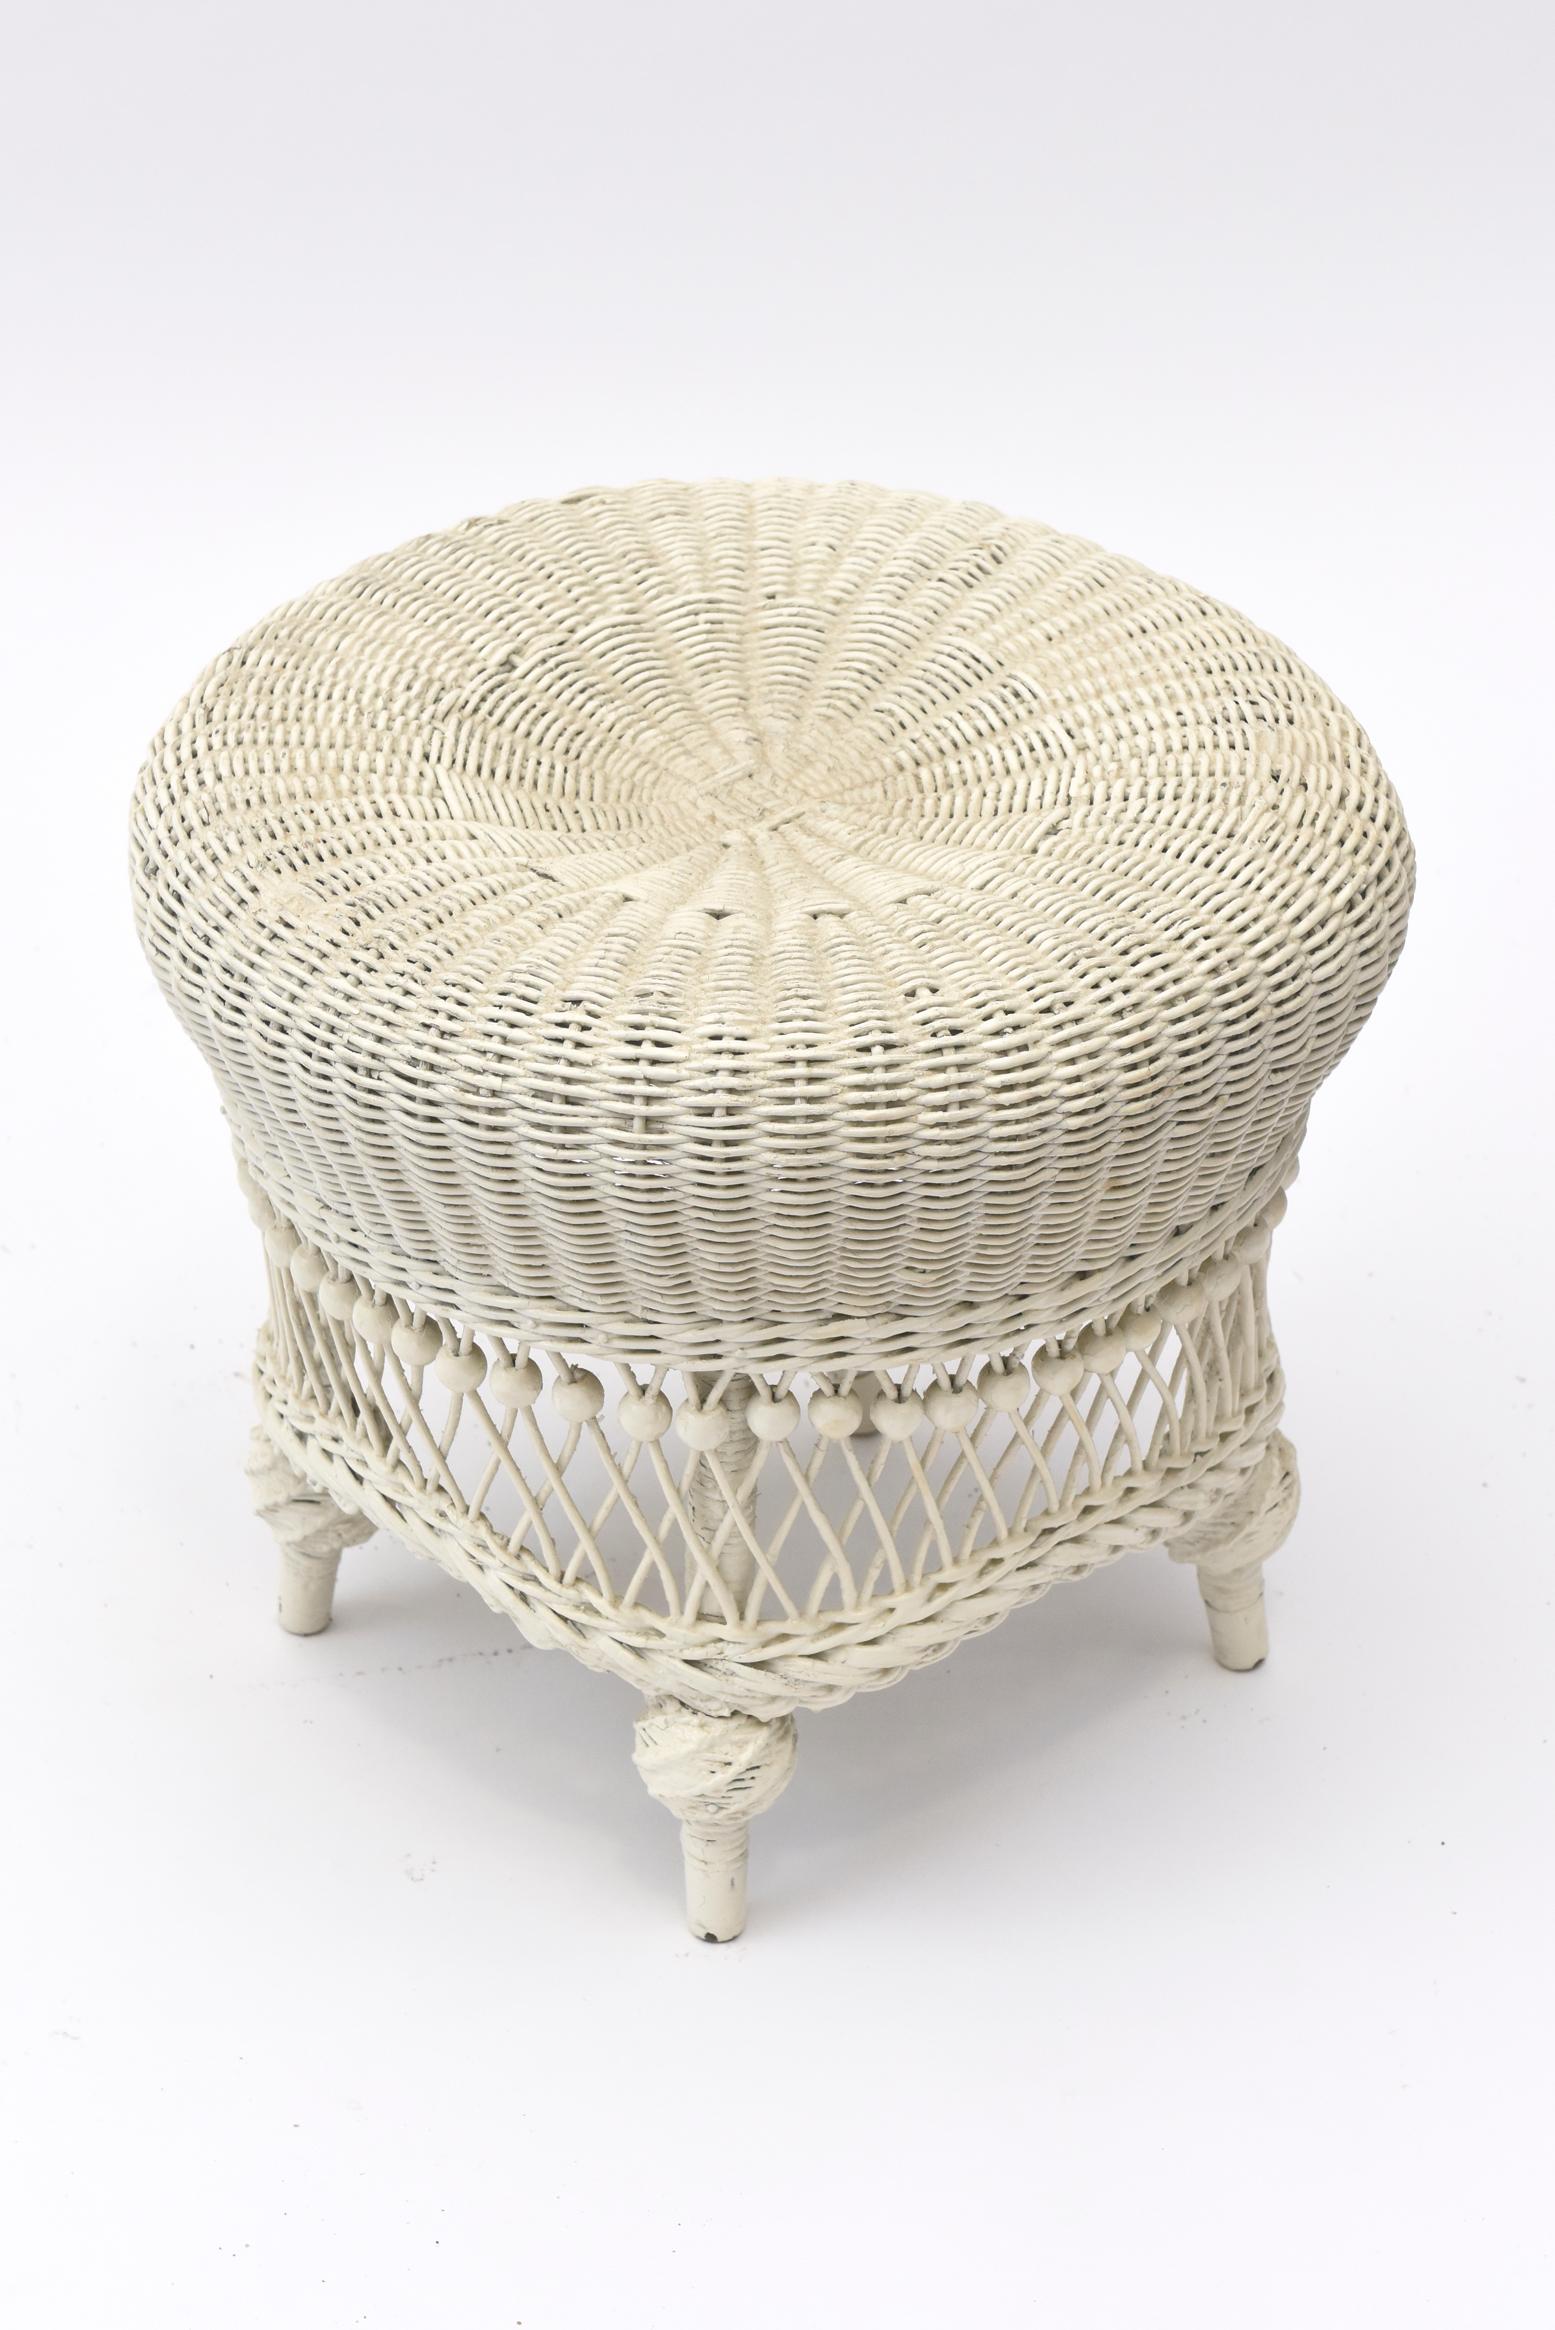 Part of a large collection of ornate Victorian wicker that was collected over the years by a Senator's wife. A magnificent example of a Mid Victorian beaded foot stool, it has a tightly woven indented rolled top. Beneath the top is a row of beads to